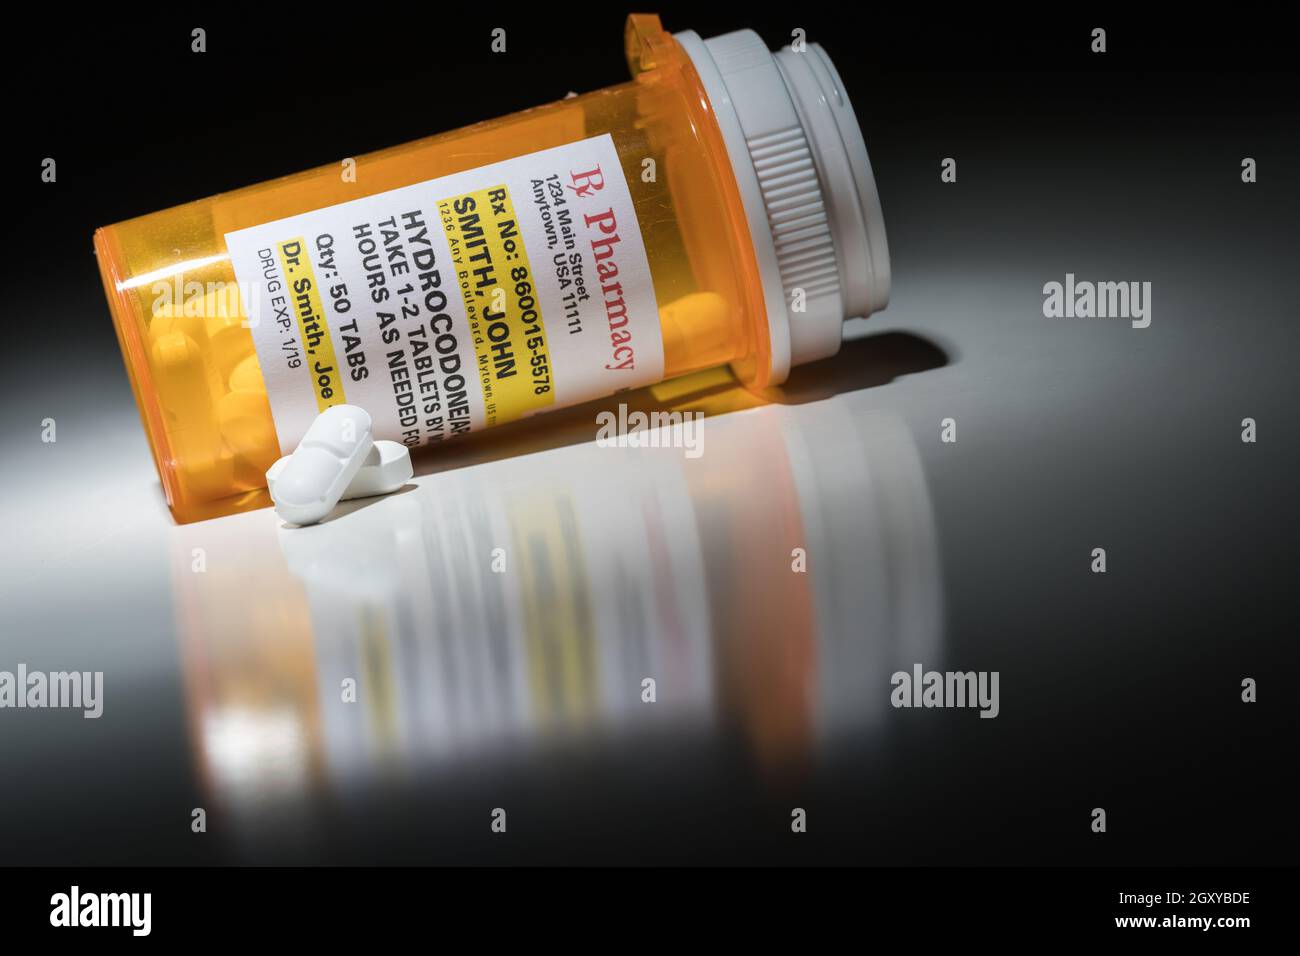 Hydrocodone Pills and Prescription Bottle with Non Proprietary Label. No model release required - contains fictitious information. Stock Photo